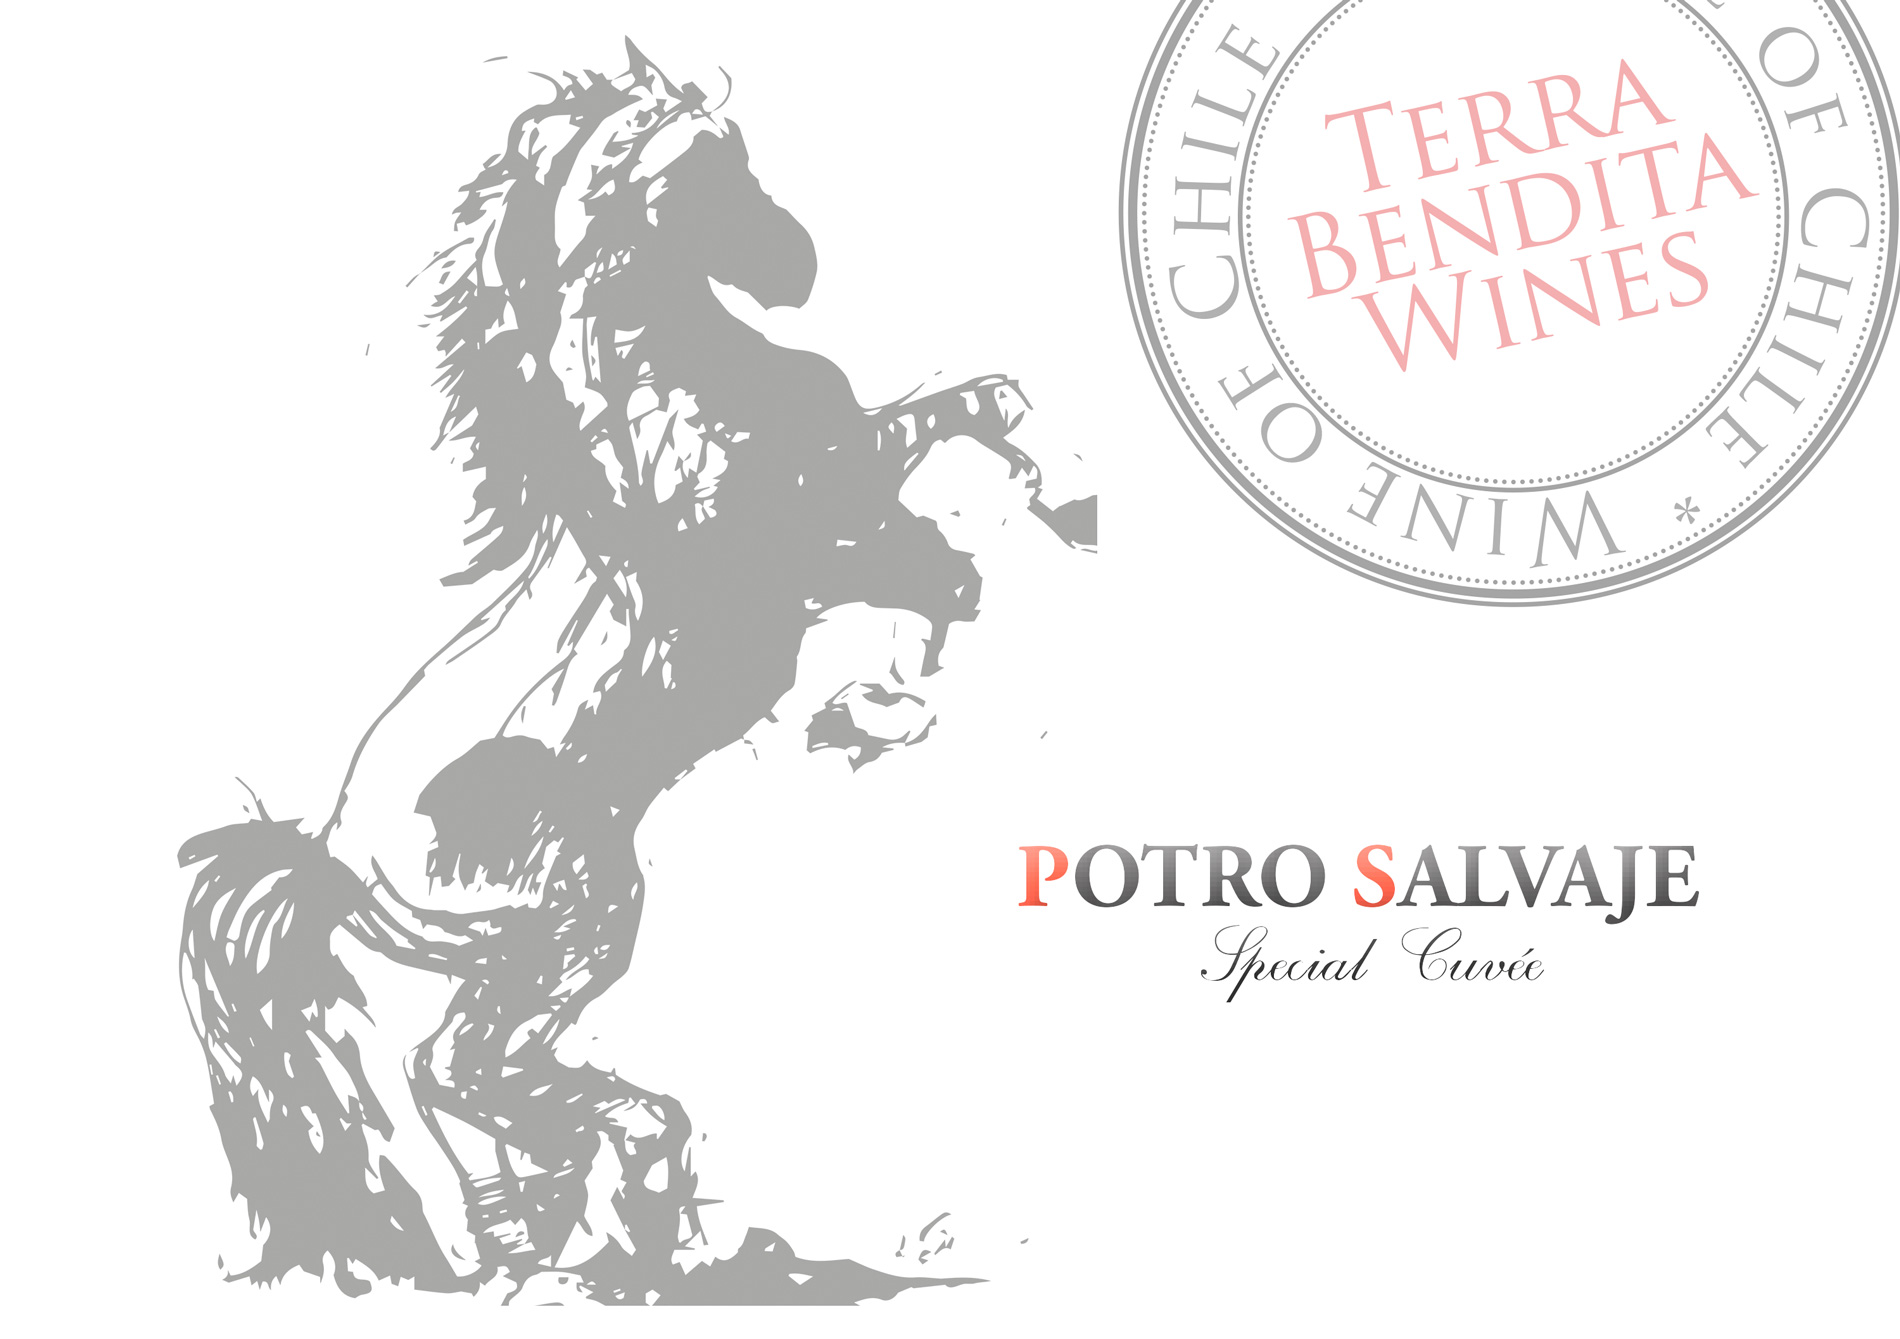 Portfolio of graphic and creative design works on wine labels and packaging for Chilean wine: POTRO SALVAJE